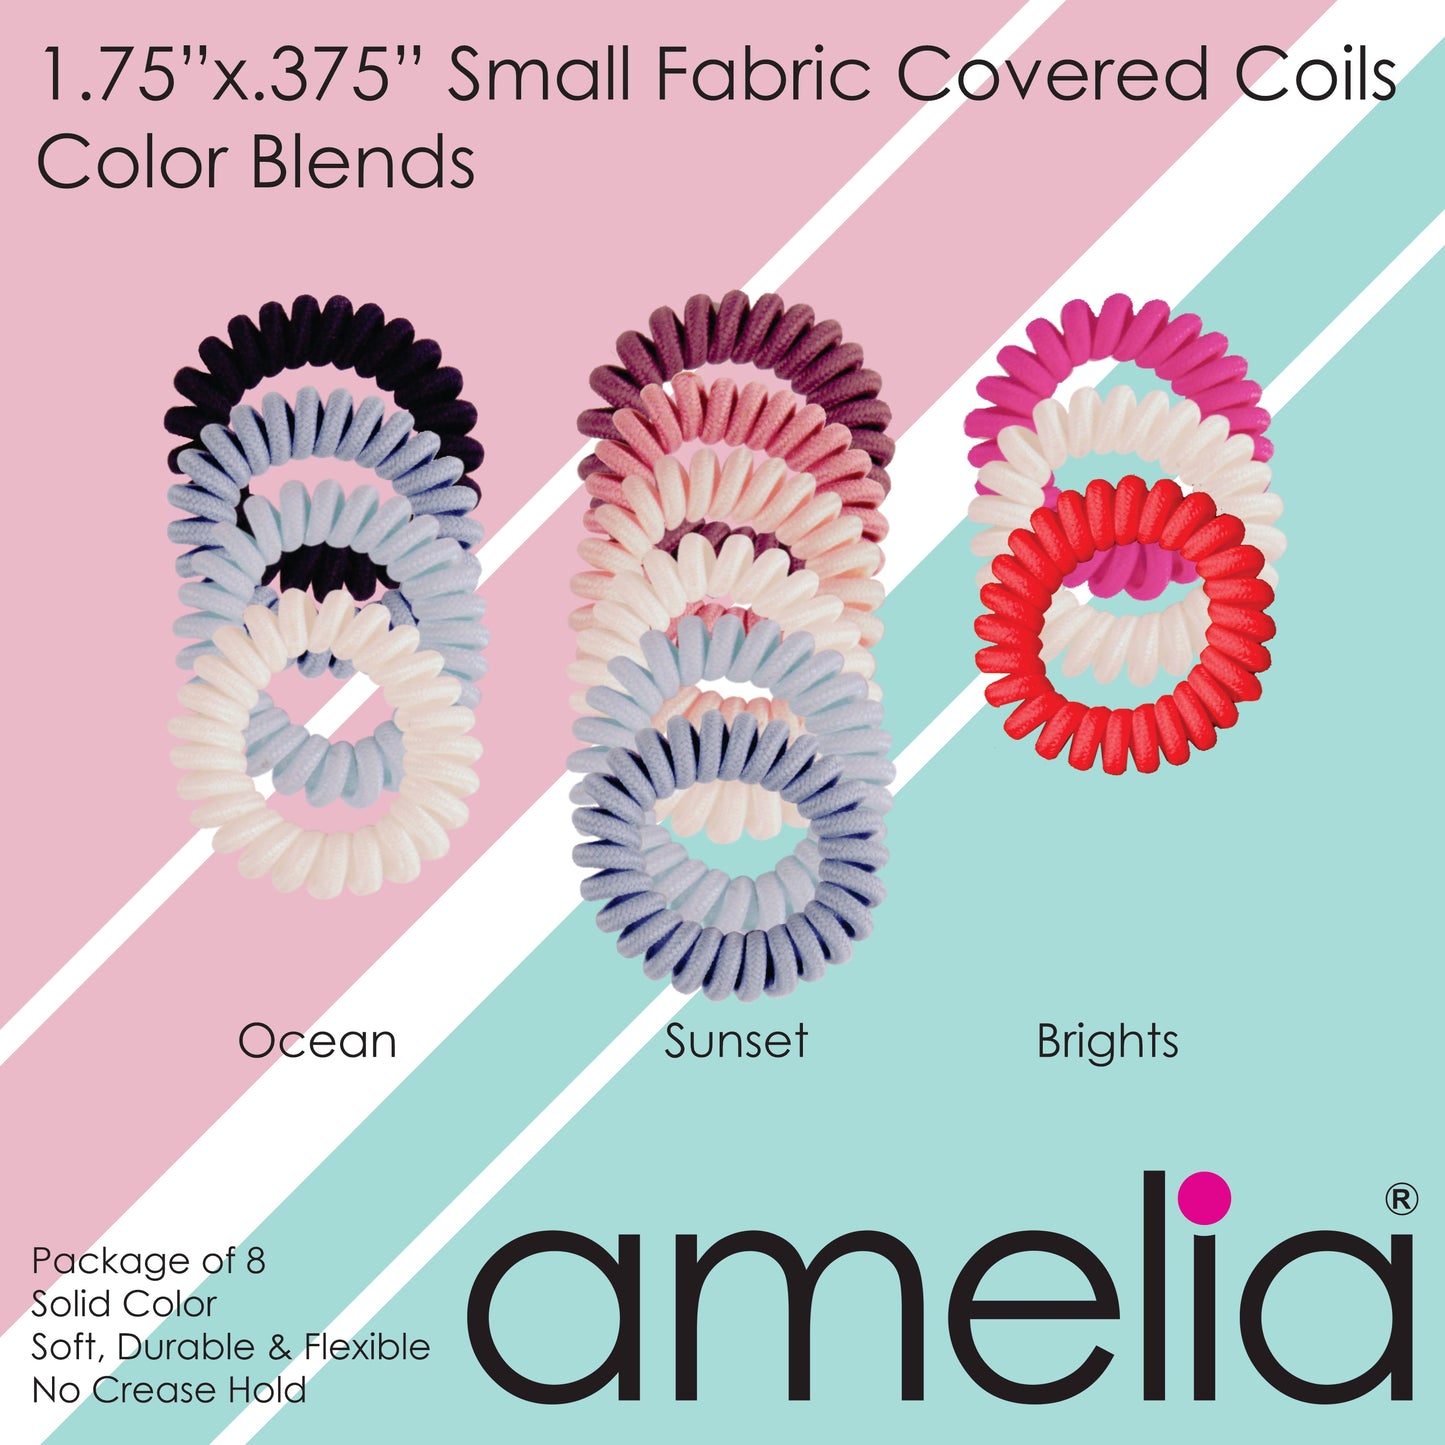 Amelia Beauty, 8 Small Fabric Wrapped Elastic Hair Coils, 1.75in Diameter Spiral Hair Ties, Gentle on Hair, Strong Hold and Minimizes Dents and Creases, Tan